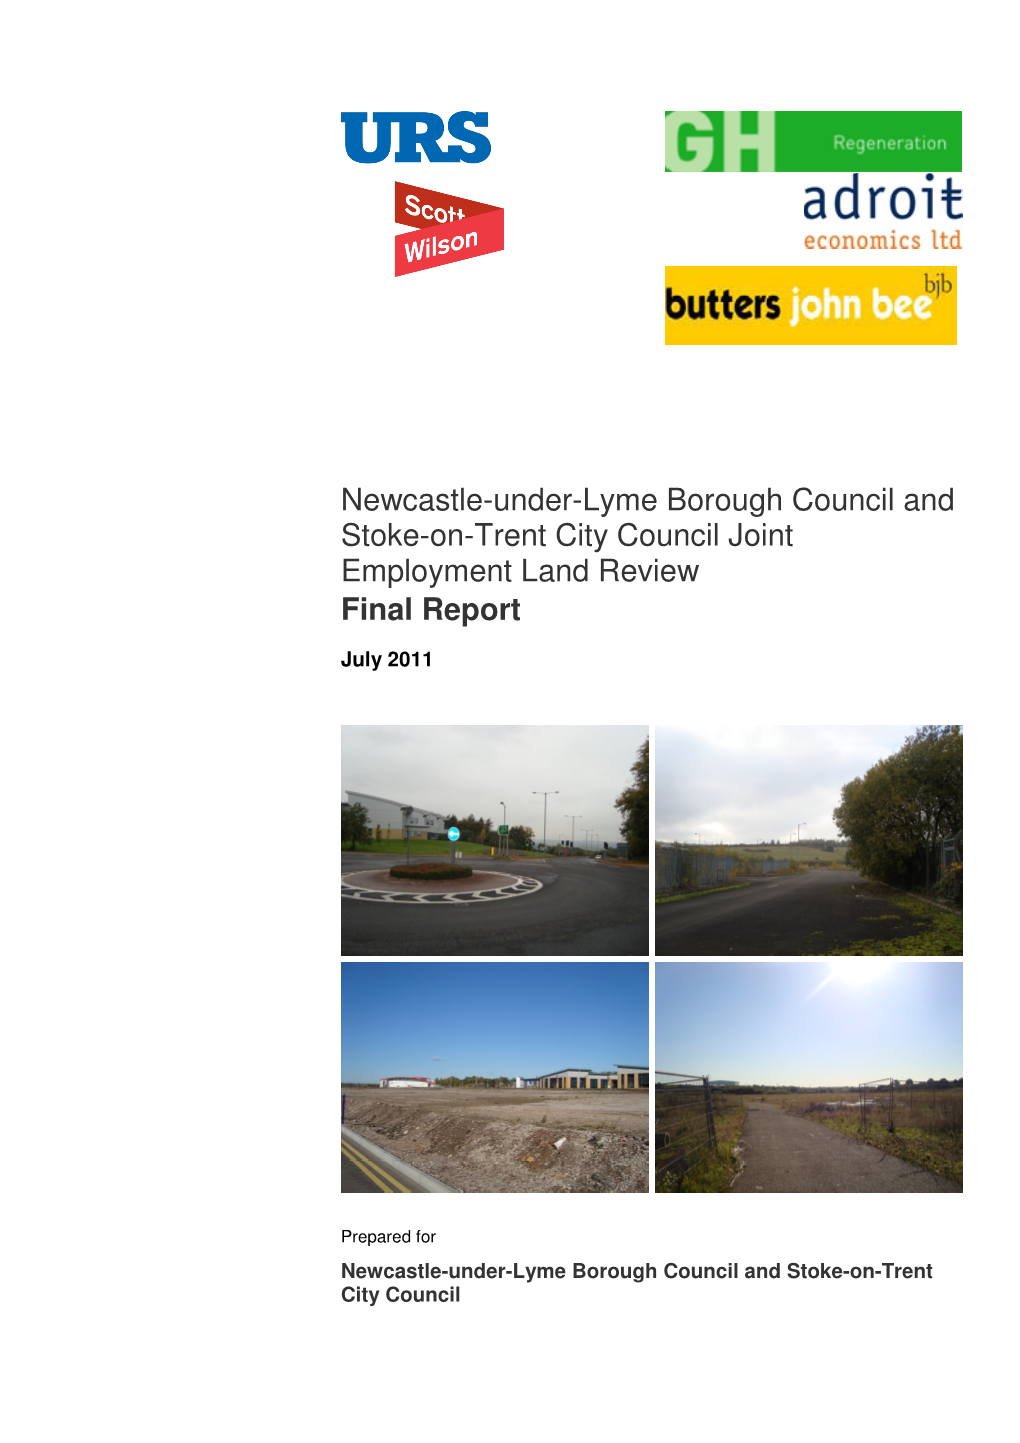 Newcastle-Under-Lyme Borough Council and Stoke-On-Trent City Council Joint Employment Land Review Final Report